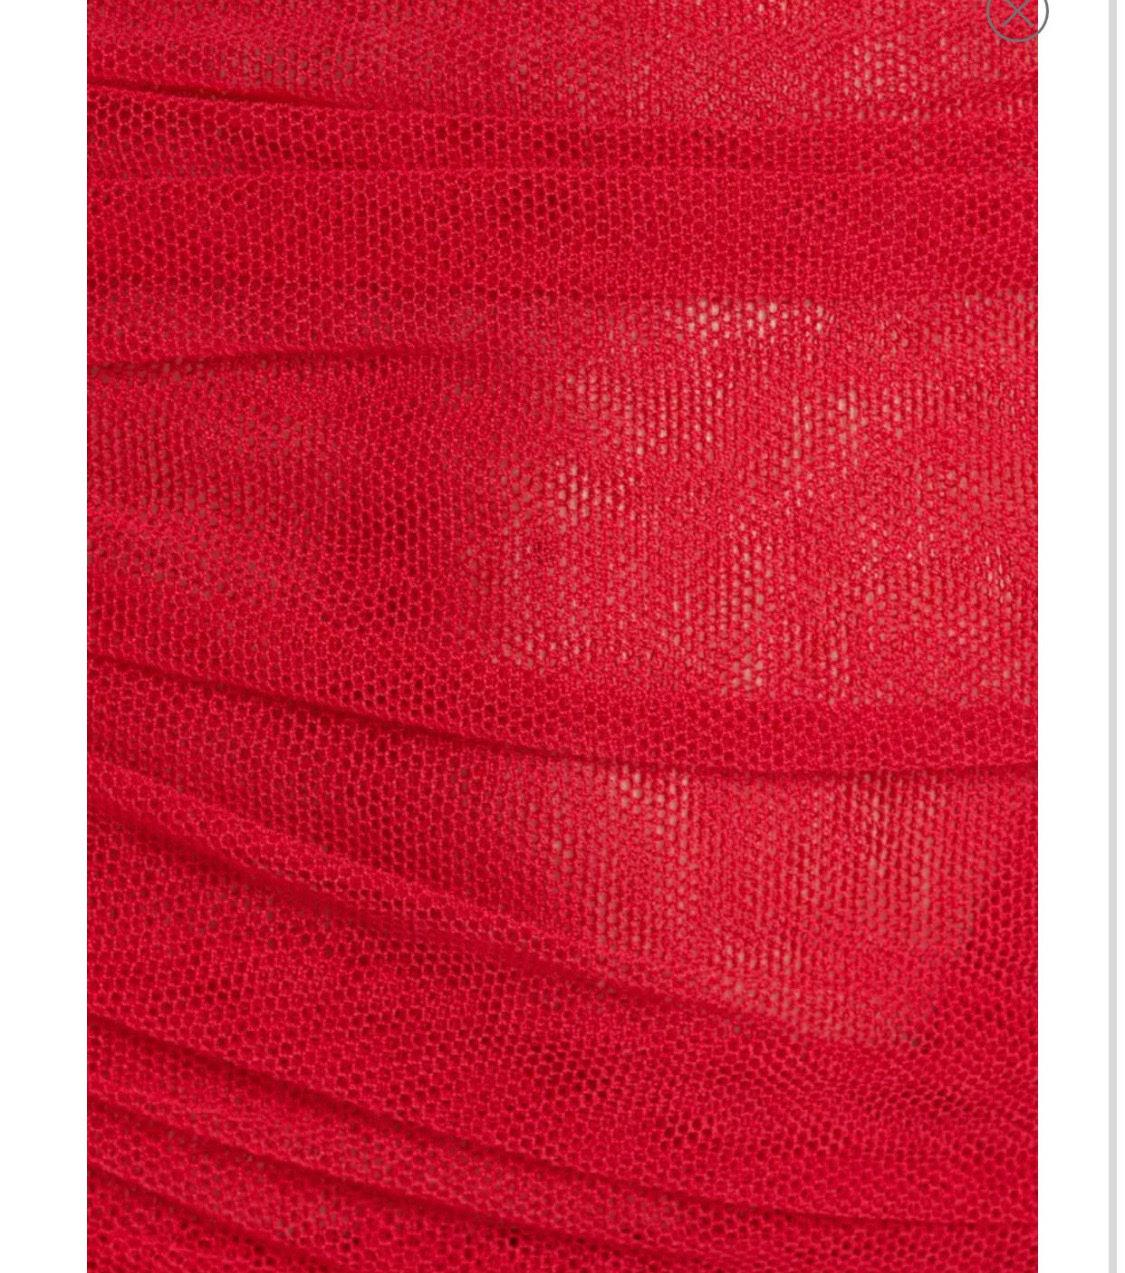 Dolce & Gabbana red two-layered cotton and nylon dress with gathers  1